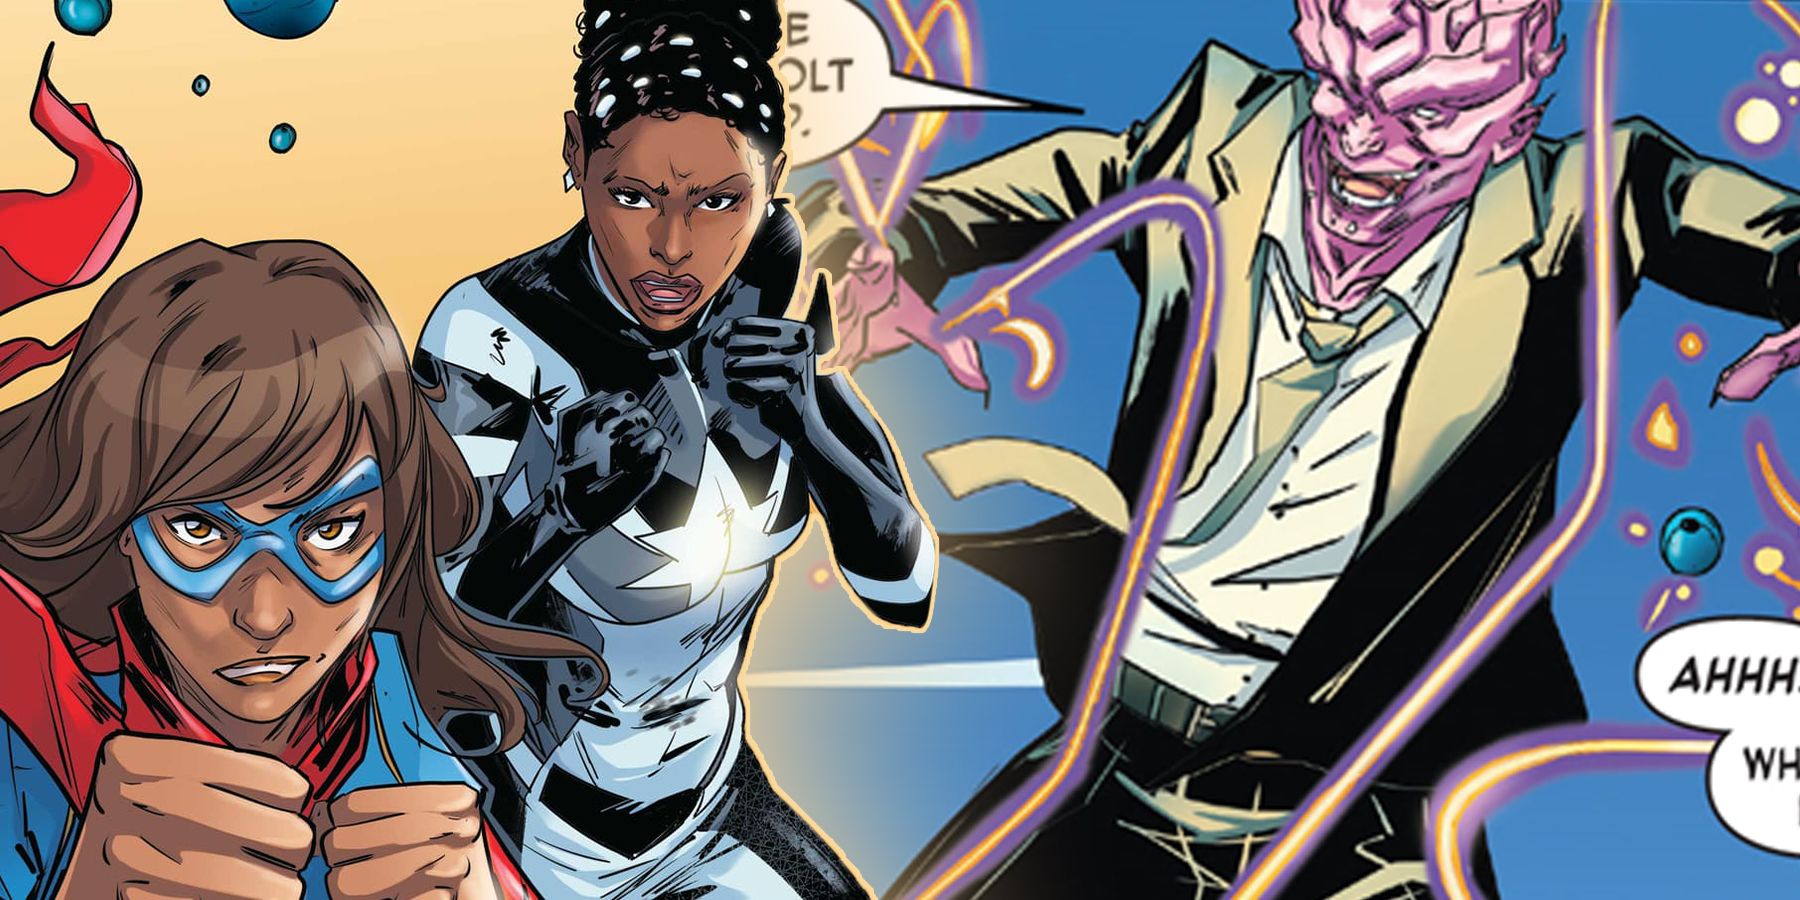 On the left, Photon and Ms Marvel have fists at the ready for a fight. On the right, Lineage flies with strings of light energy winding around him. 